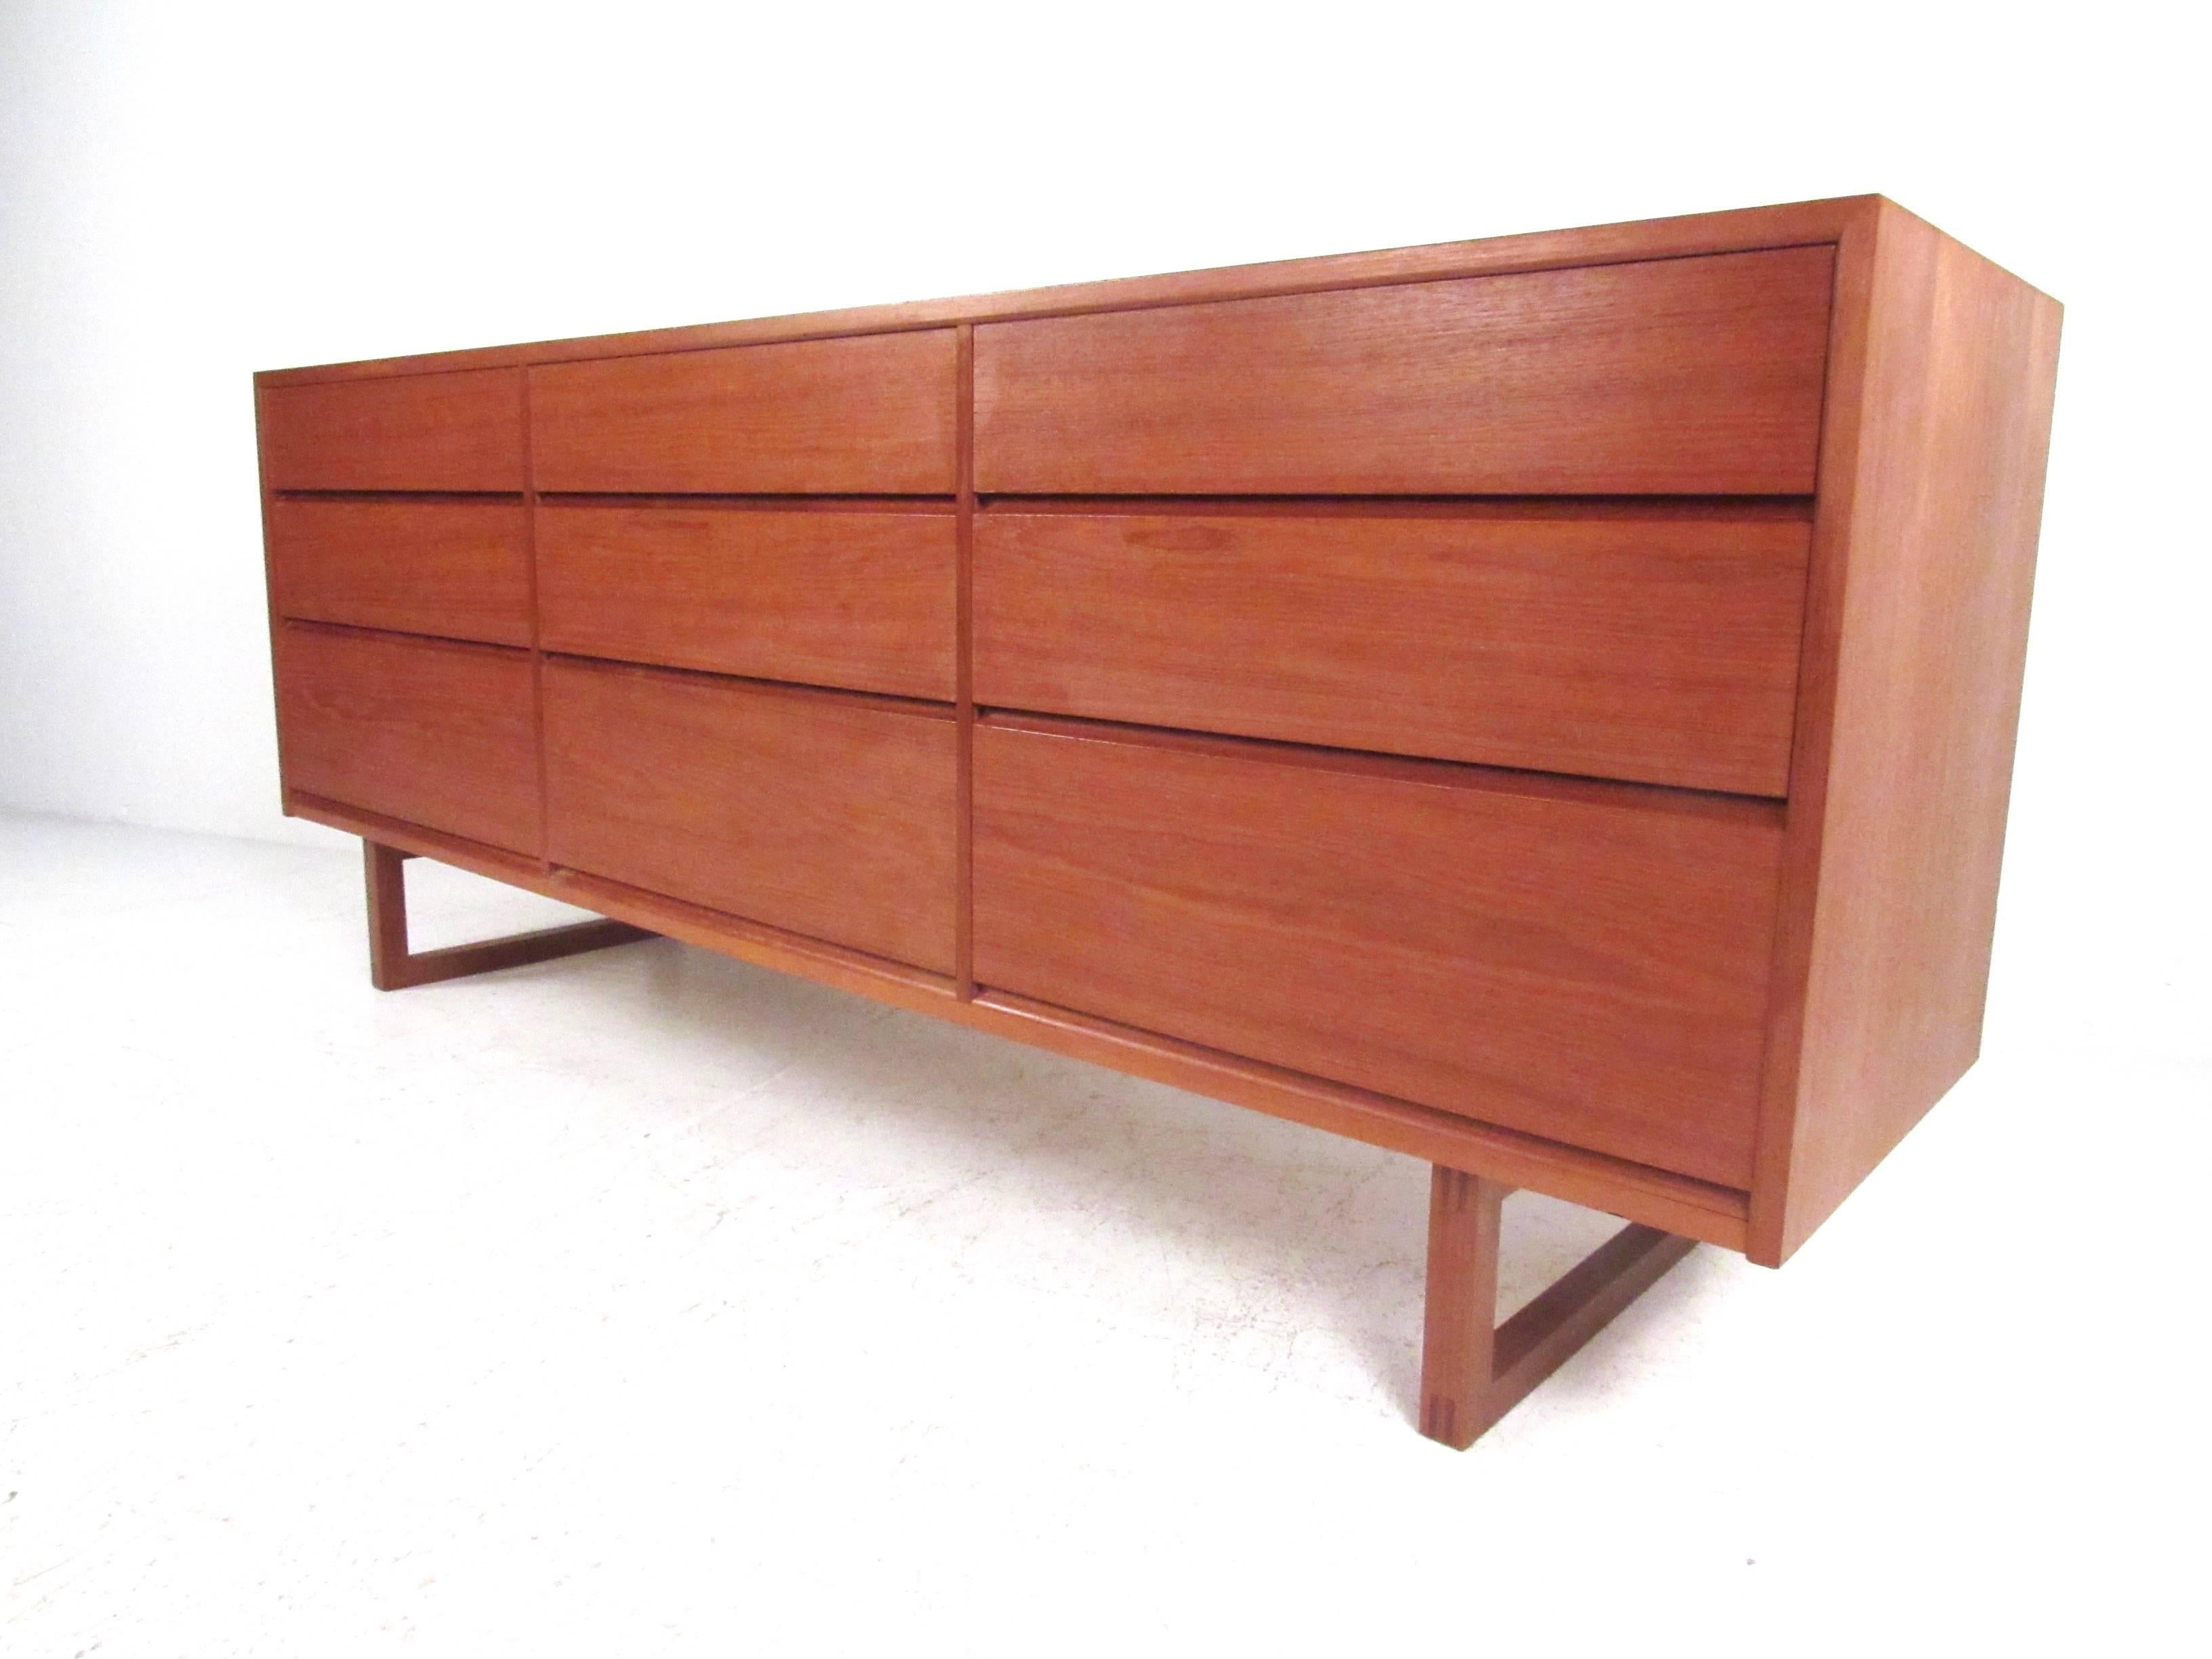 This vintage modern teak dresser features high quality Danish construction with dovetail drawers and stylish sled legs. Rich teak finish and nine spacious drawers for storage make this a versatile and visually impressive addition to any interior.